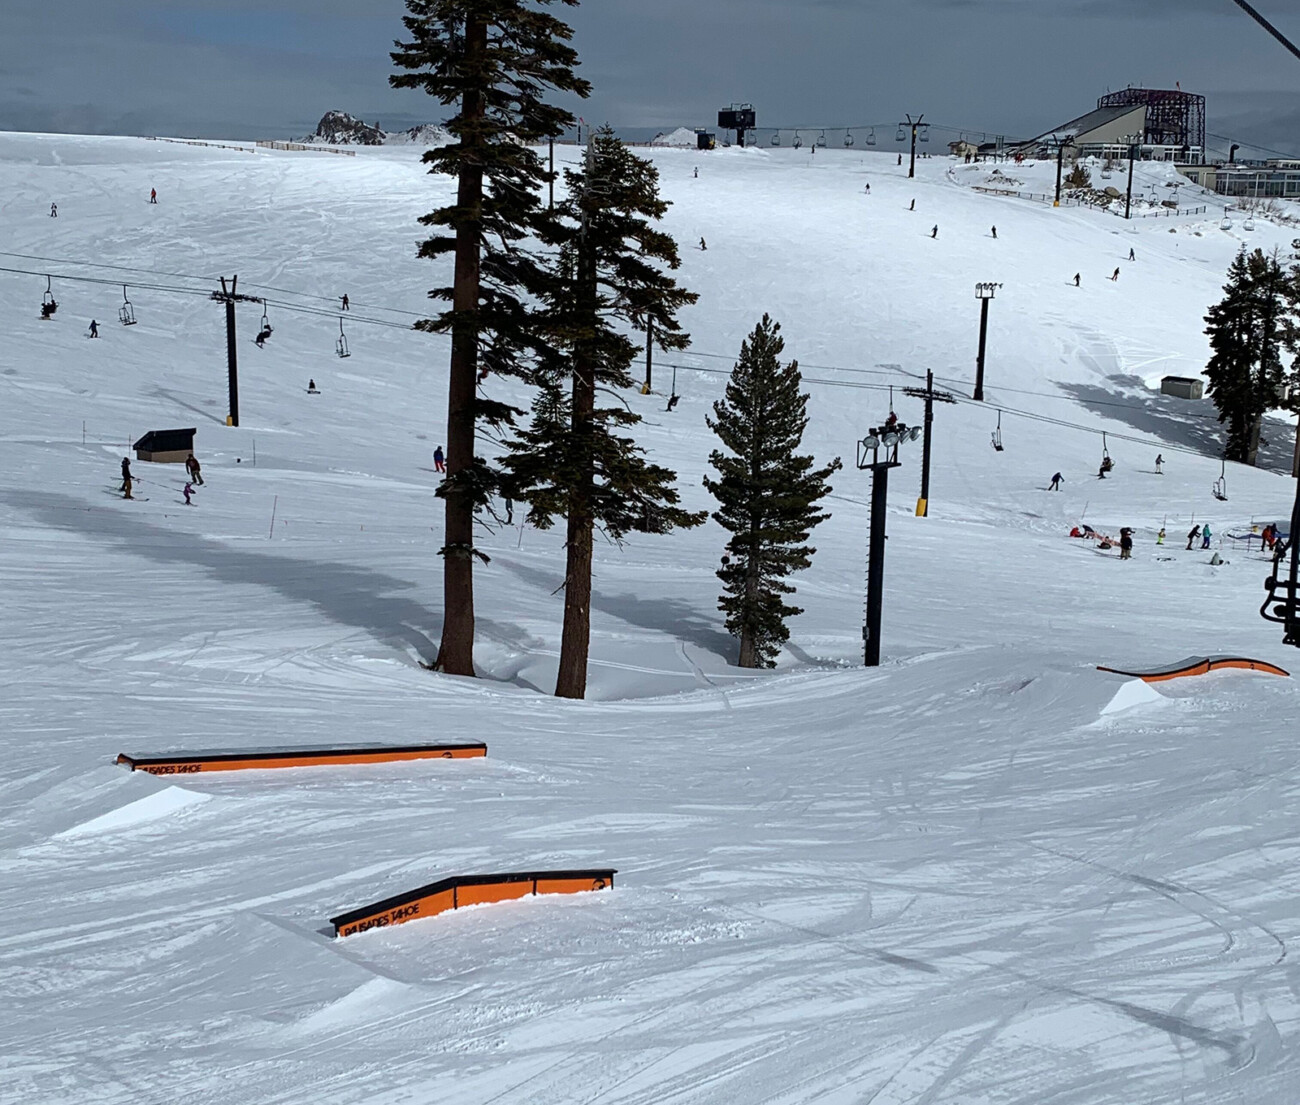 Features in Belmont Terrain Park on February 17th.